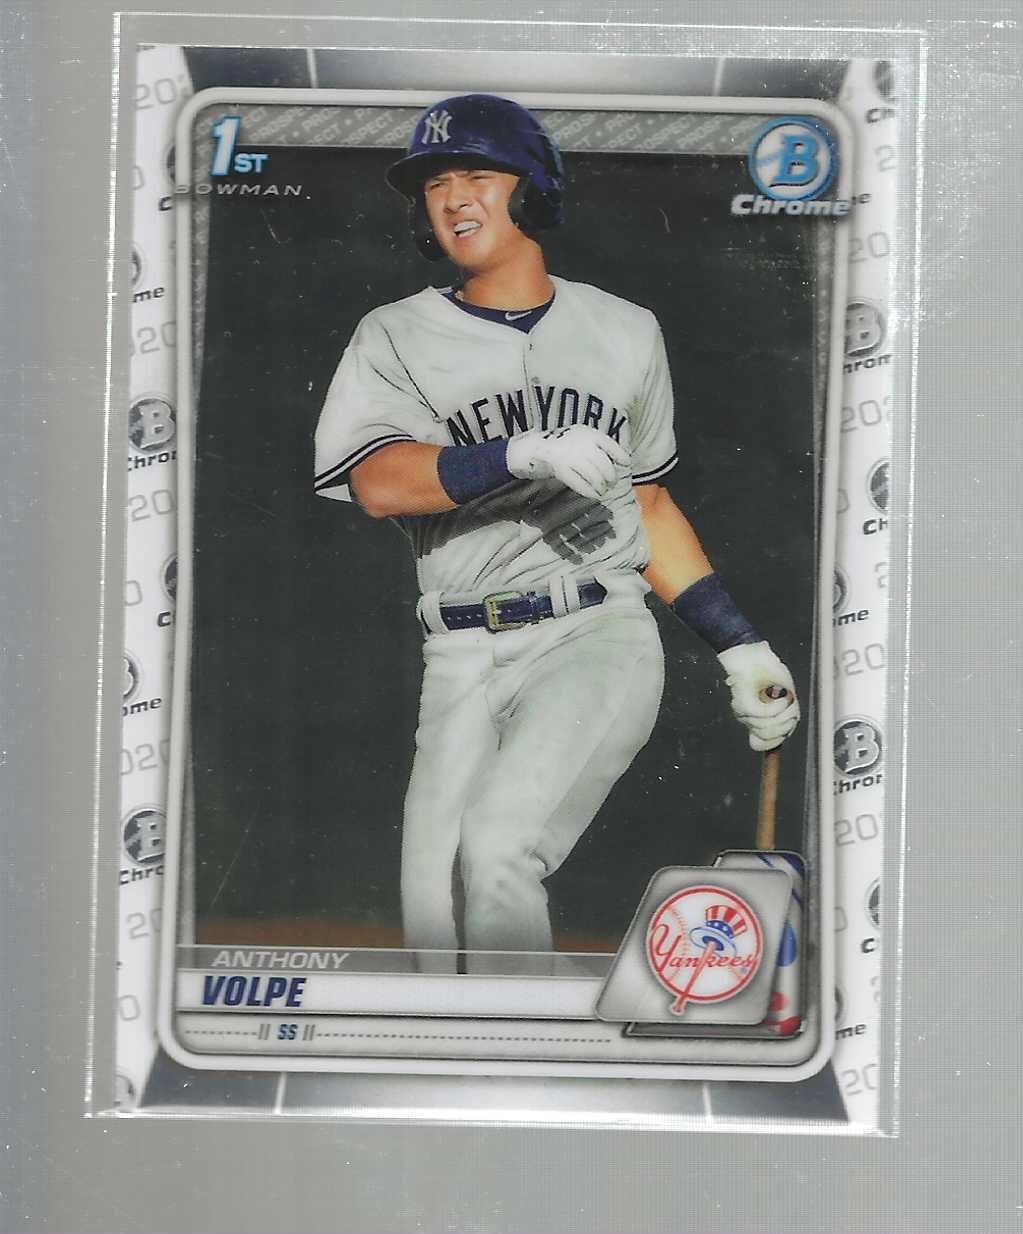 2020 Bowman Chrome #139 Anthony Volpe rookie